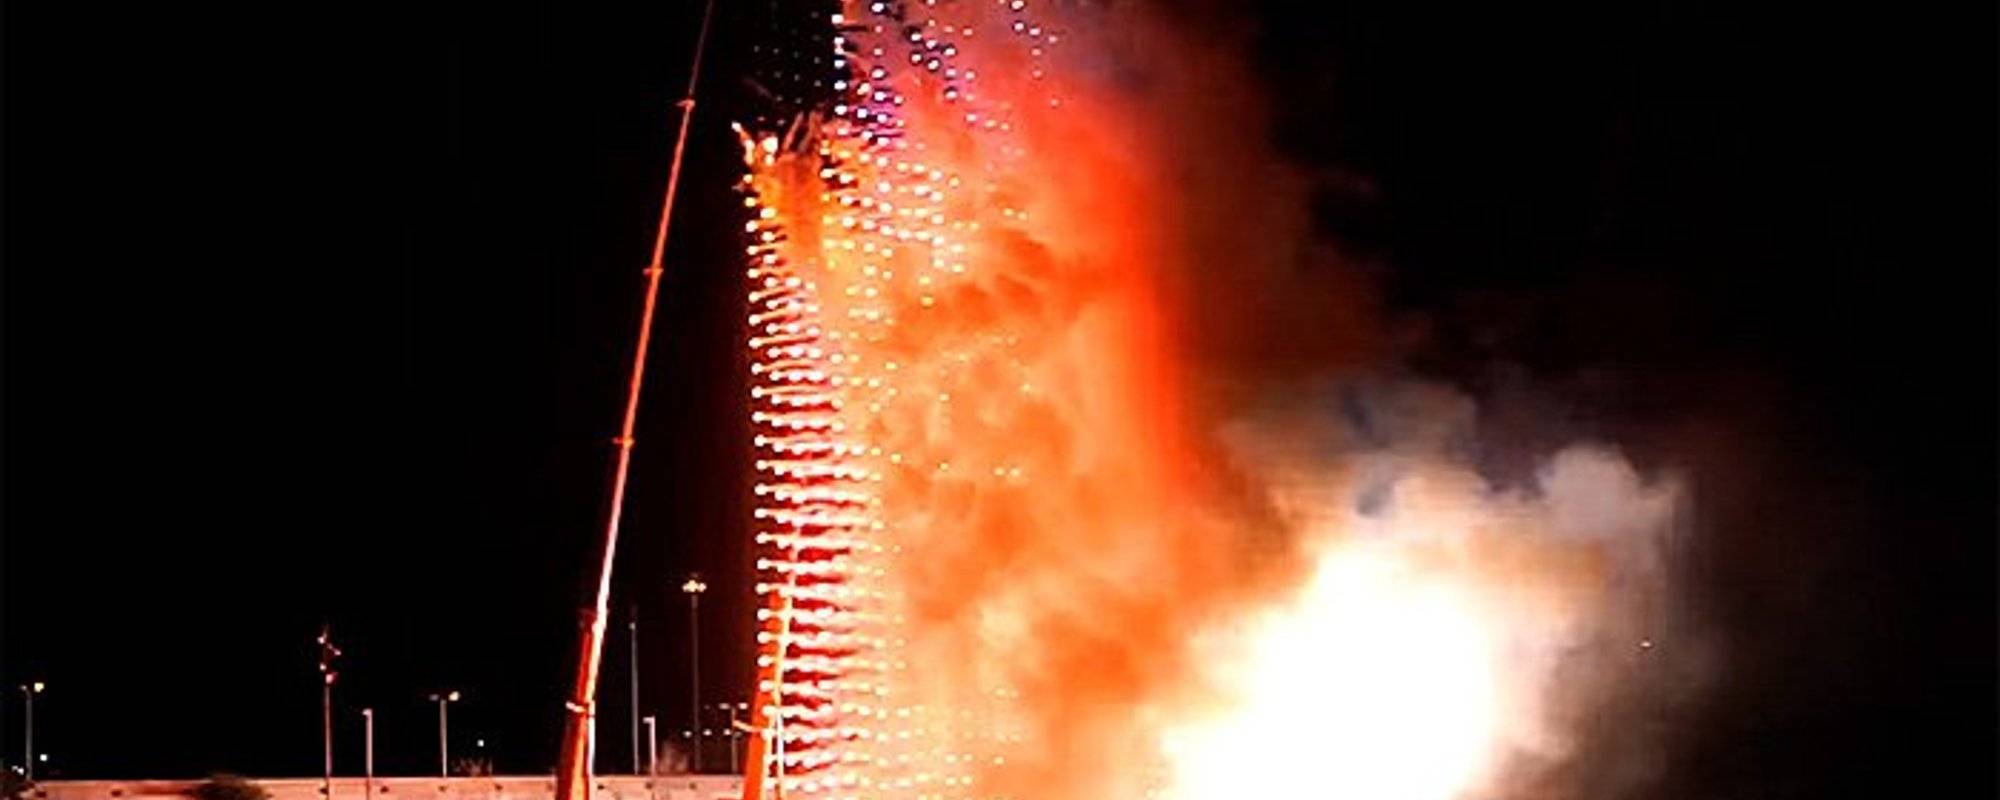 Double Vertical Mascleta - First Fireworks Of Fallas 2018